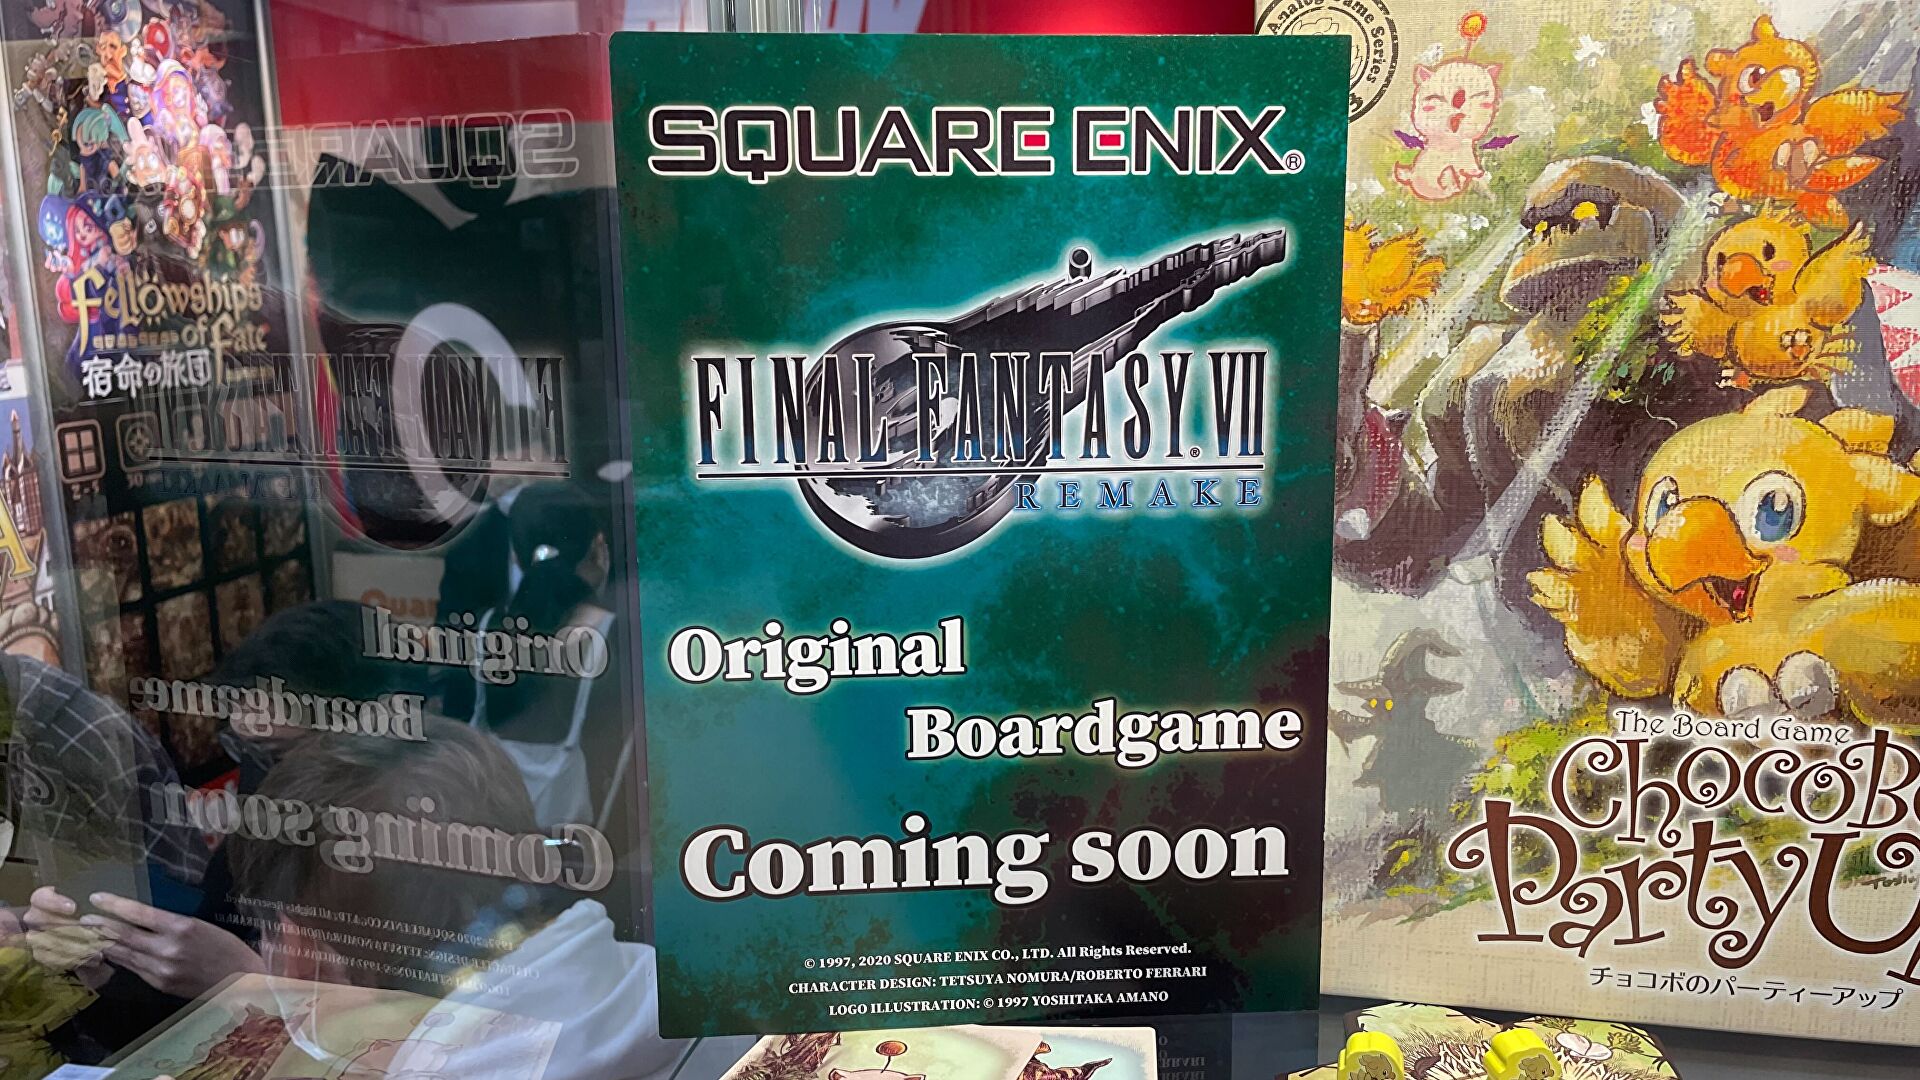 A photo of a sign at Essen Spiel saying that a Final Fantasy VII Remake original boardgame is "coming soon".